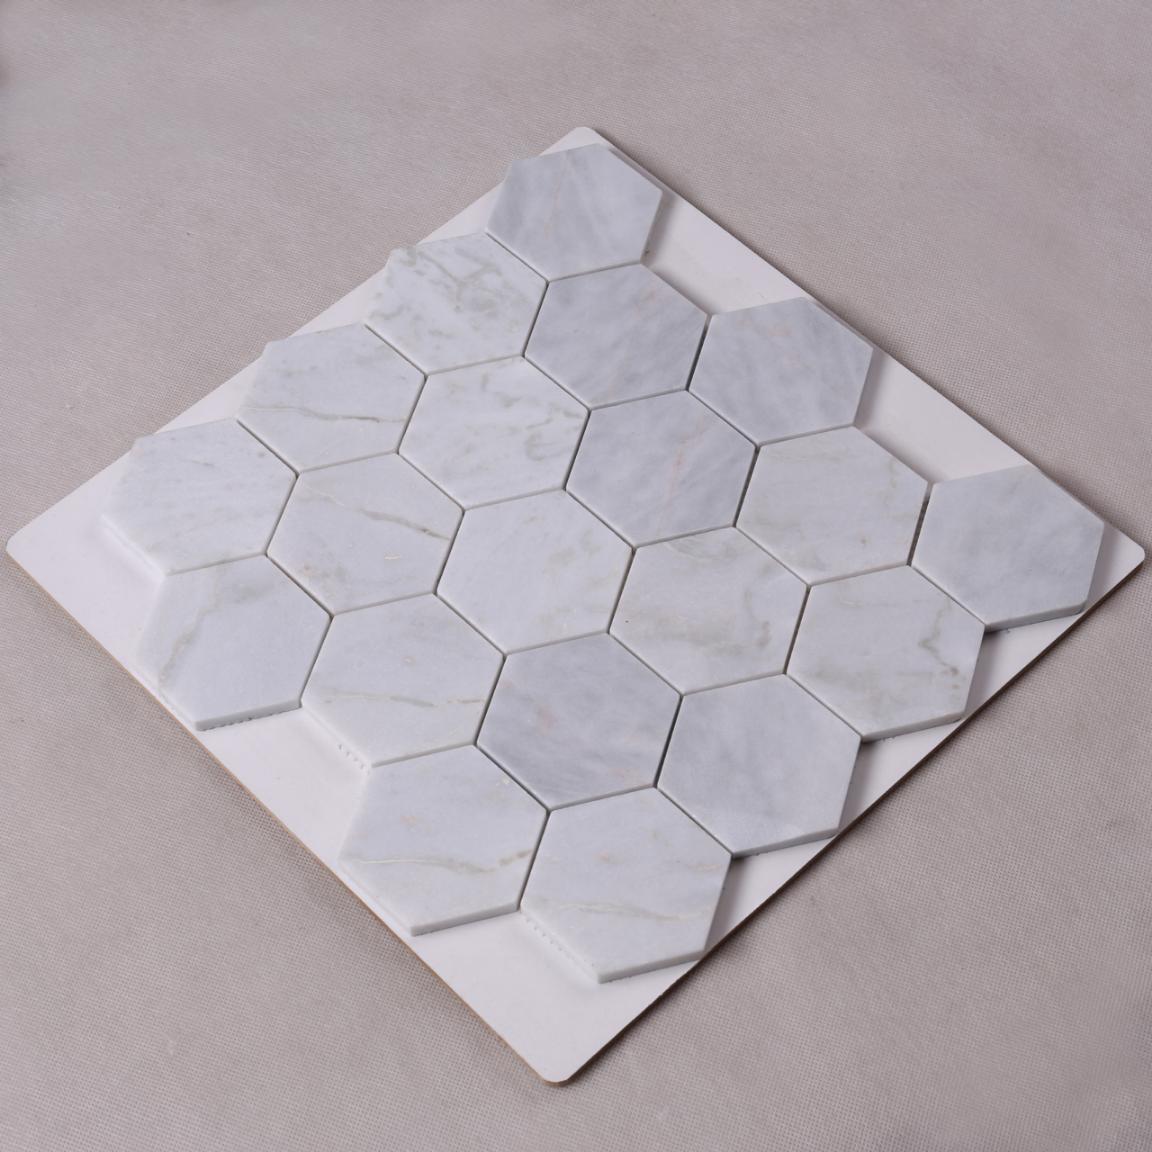 Heng Xing Best crystal glass mosaic tiles suppliers Suppliers for hotel-3